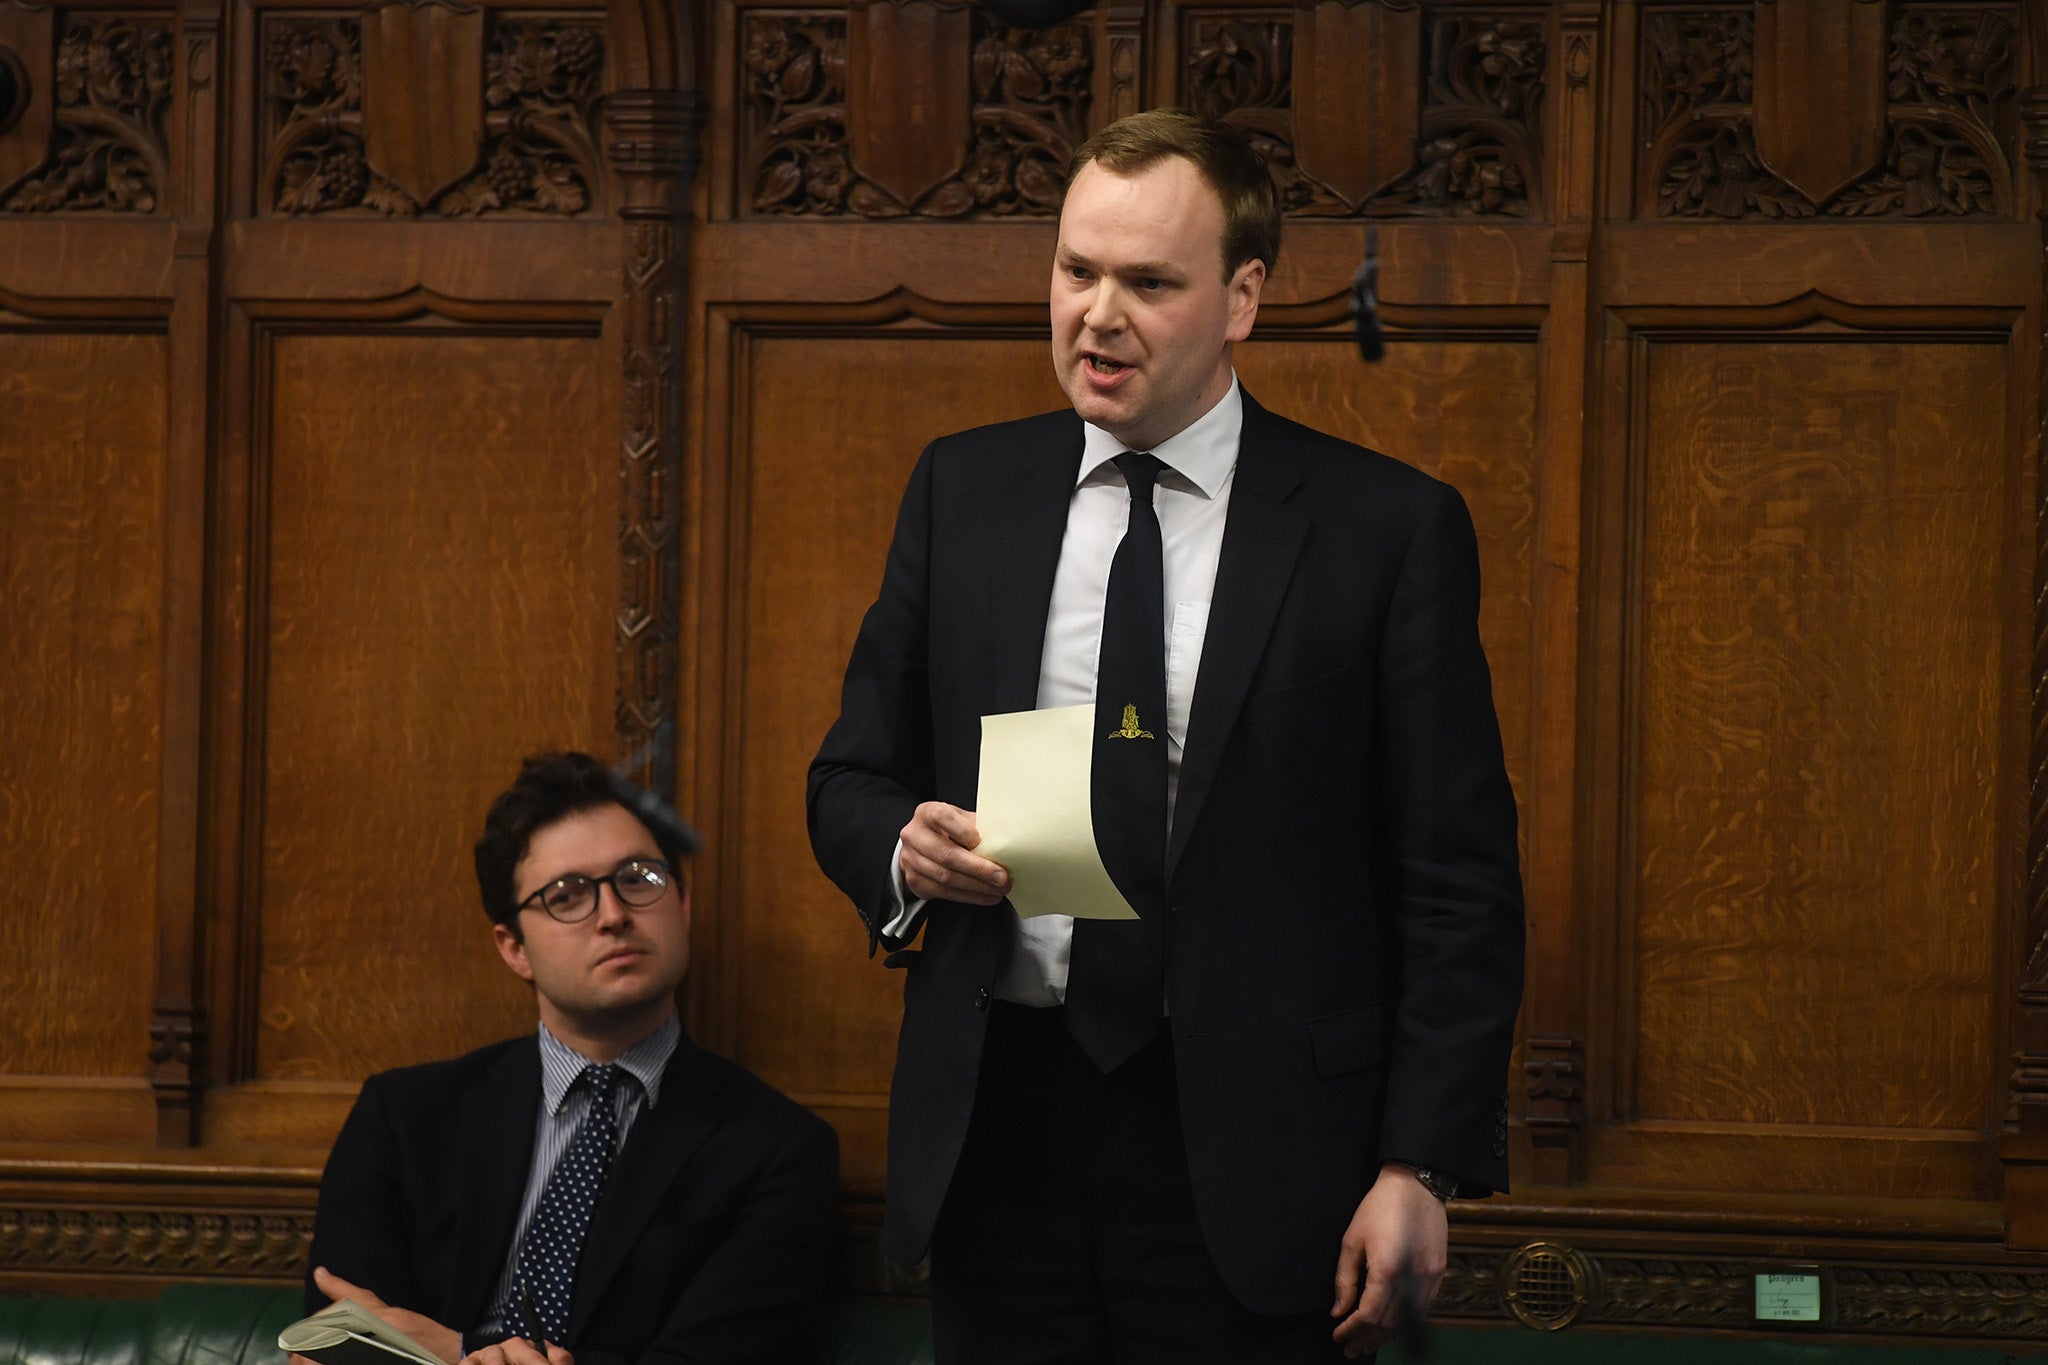 MP William Wragg has been praised for his openness after he was targeted online